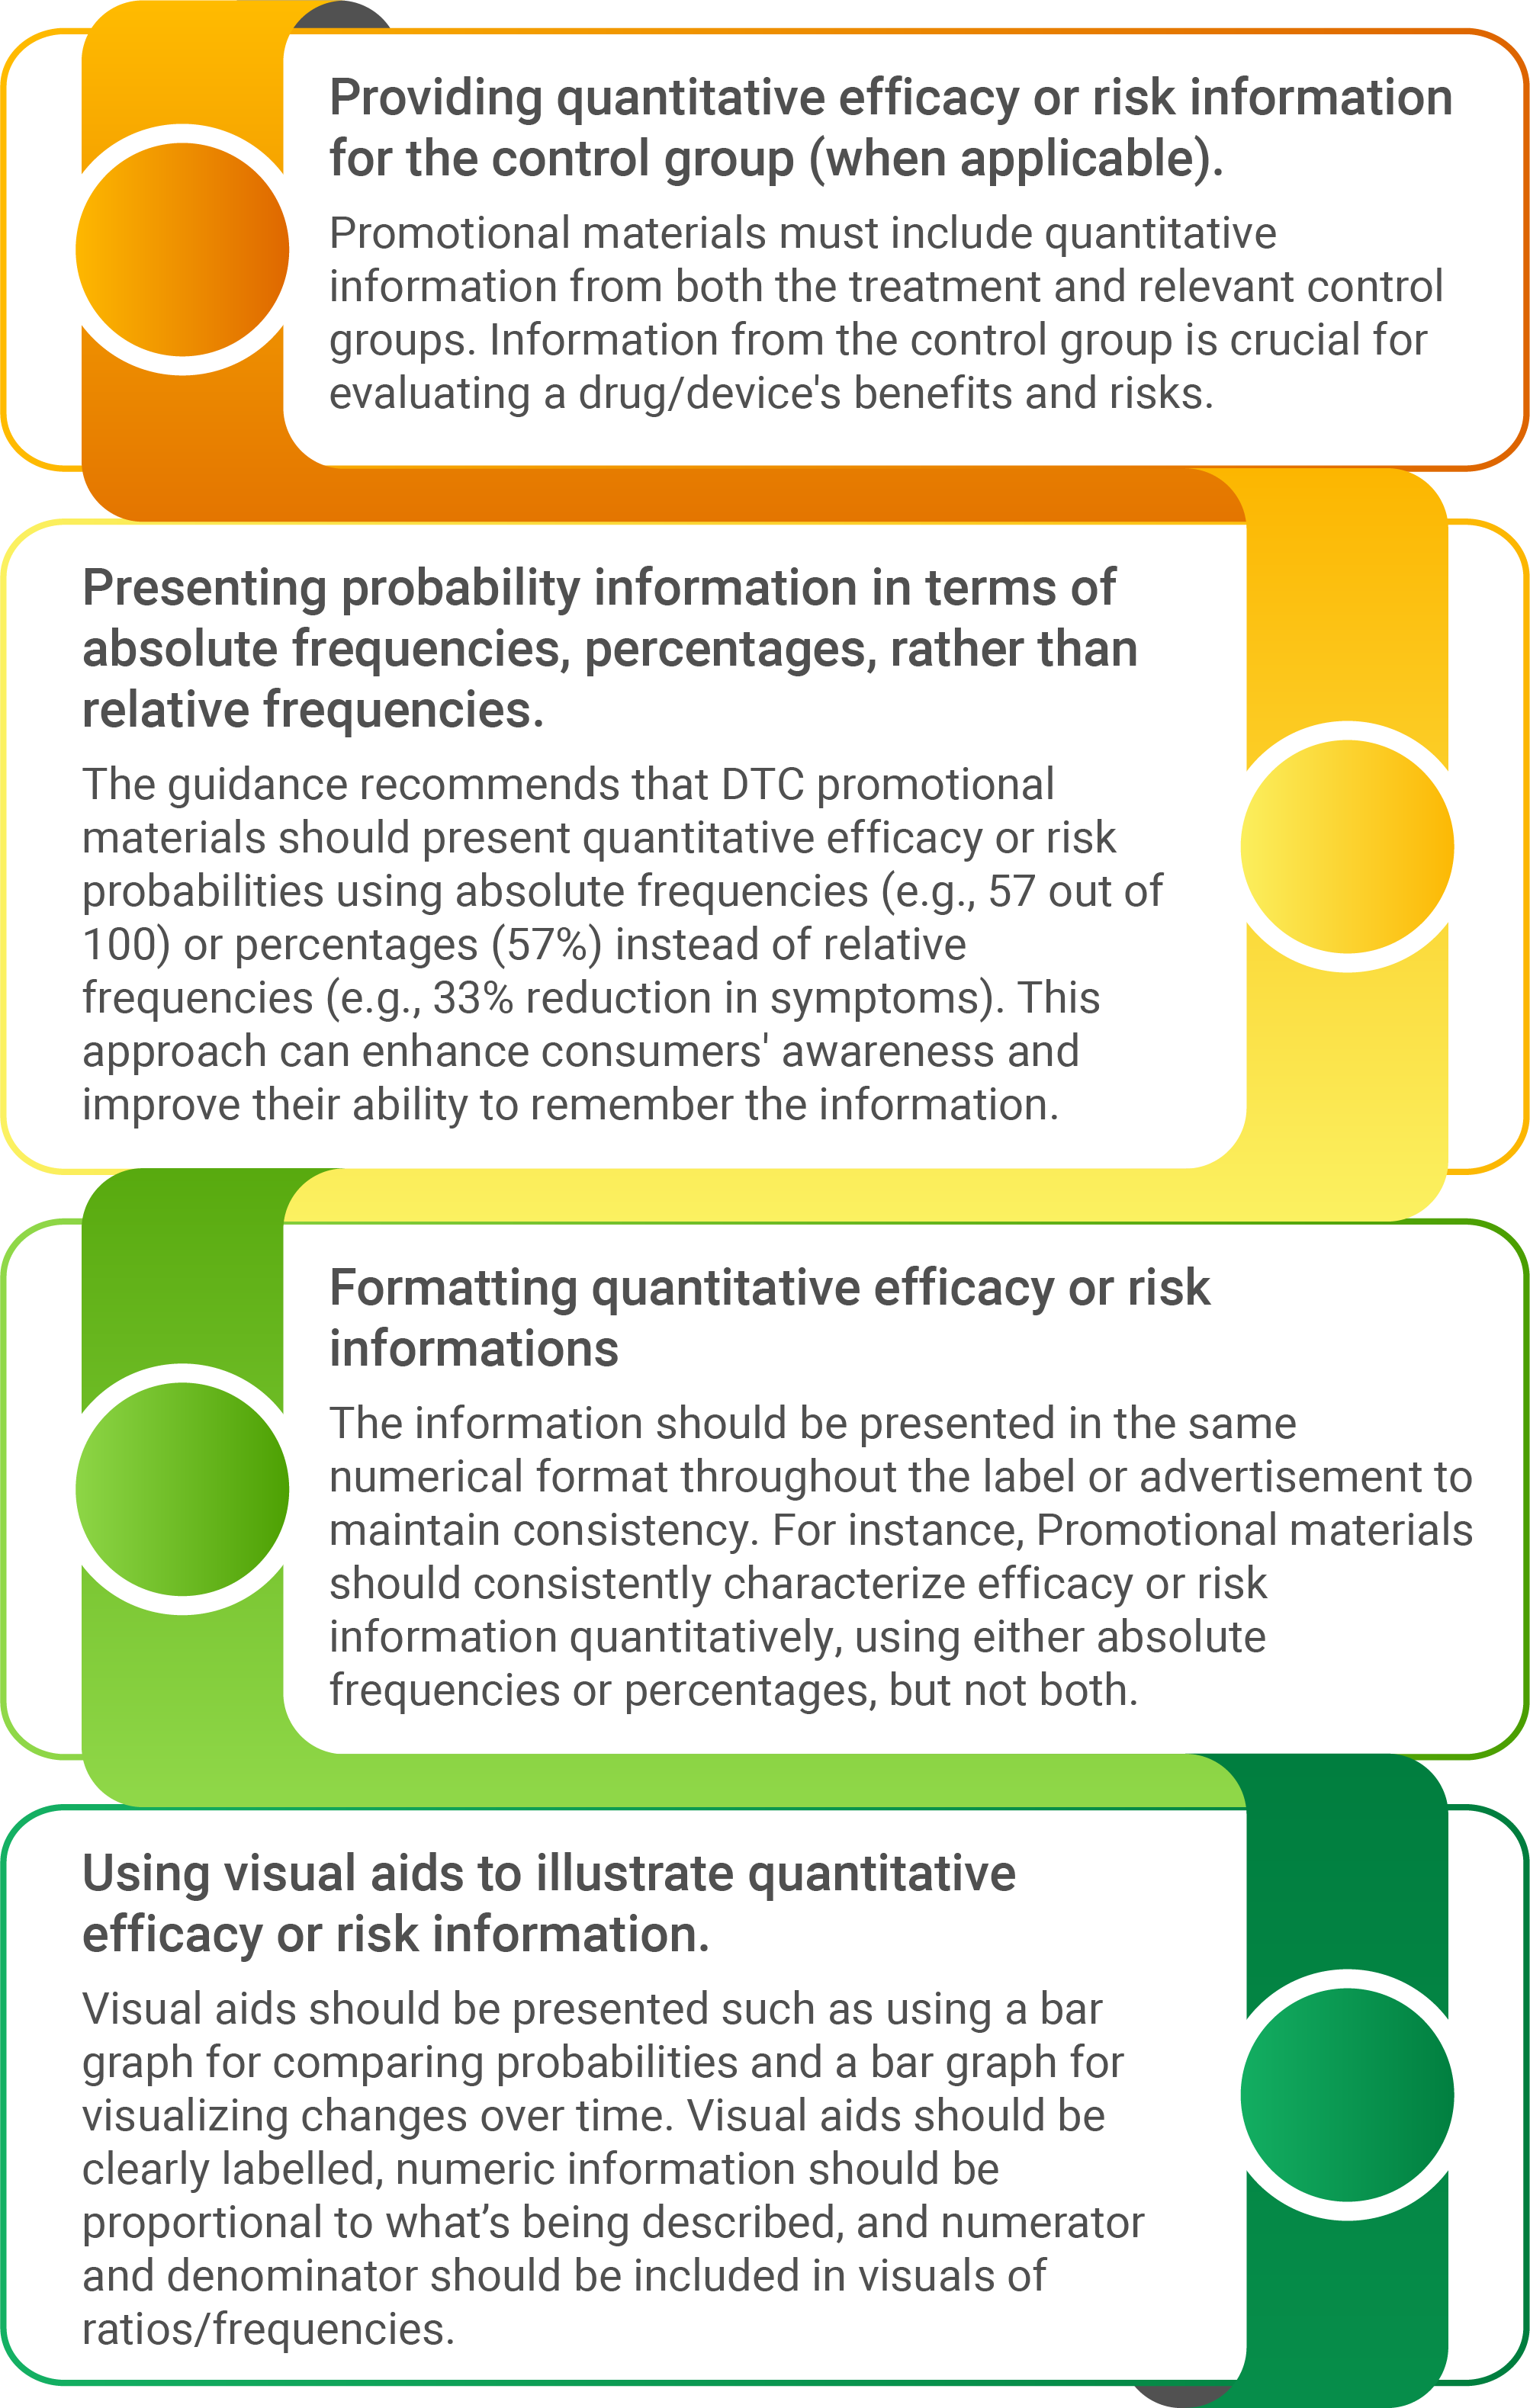 Unleashing the Power of presenting Quantitative Efficacy and Risk Information for Direct -To-Consumer promotions